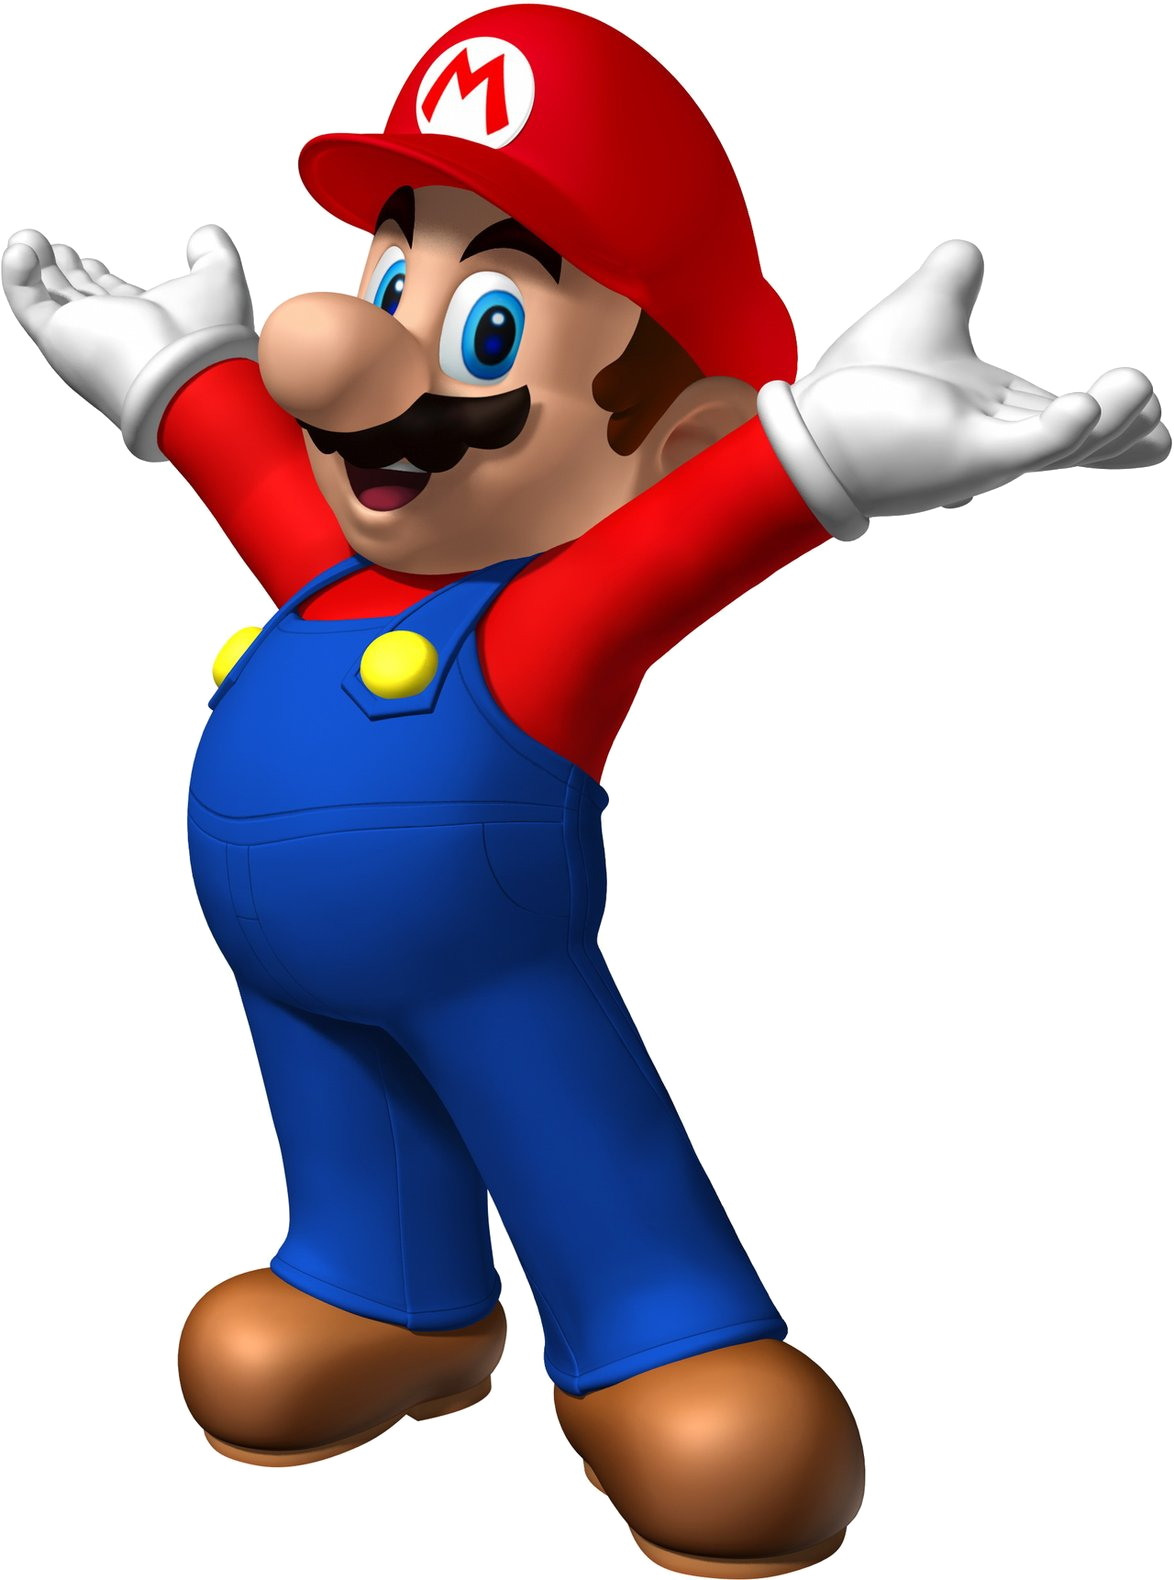 Mario png images.